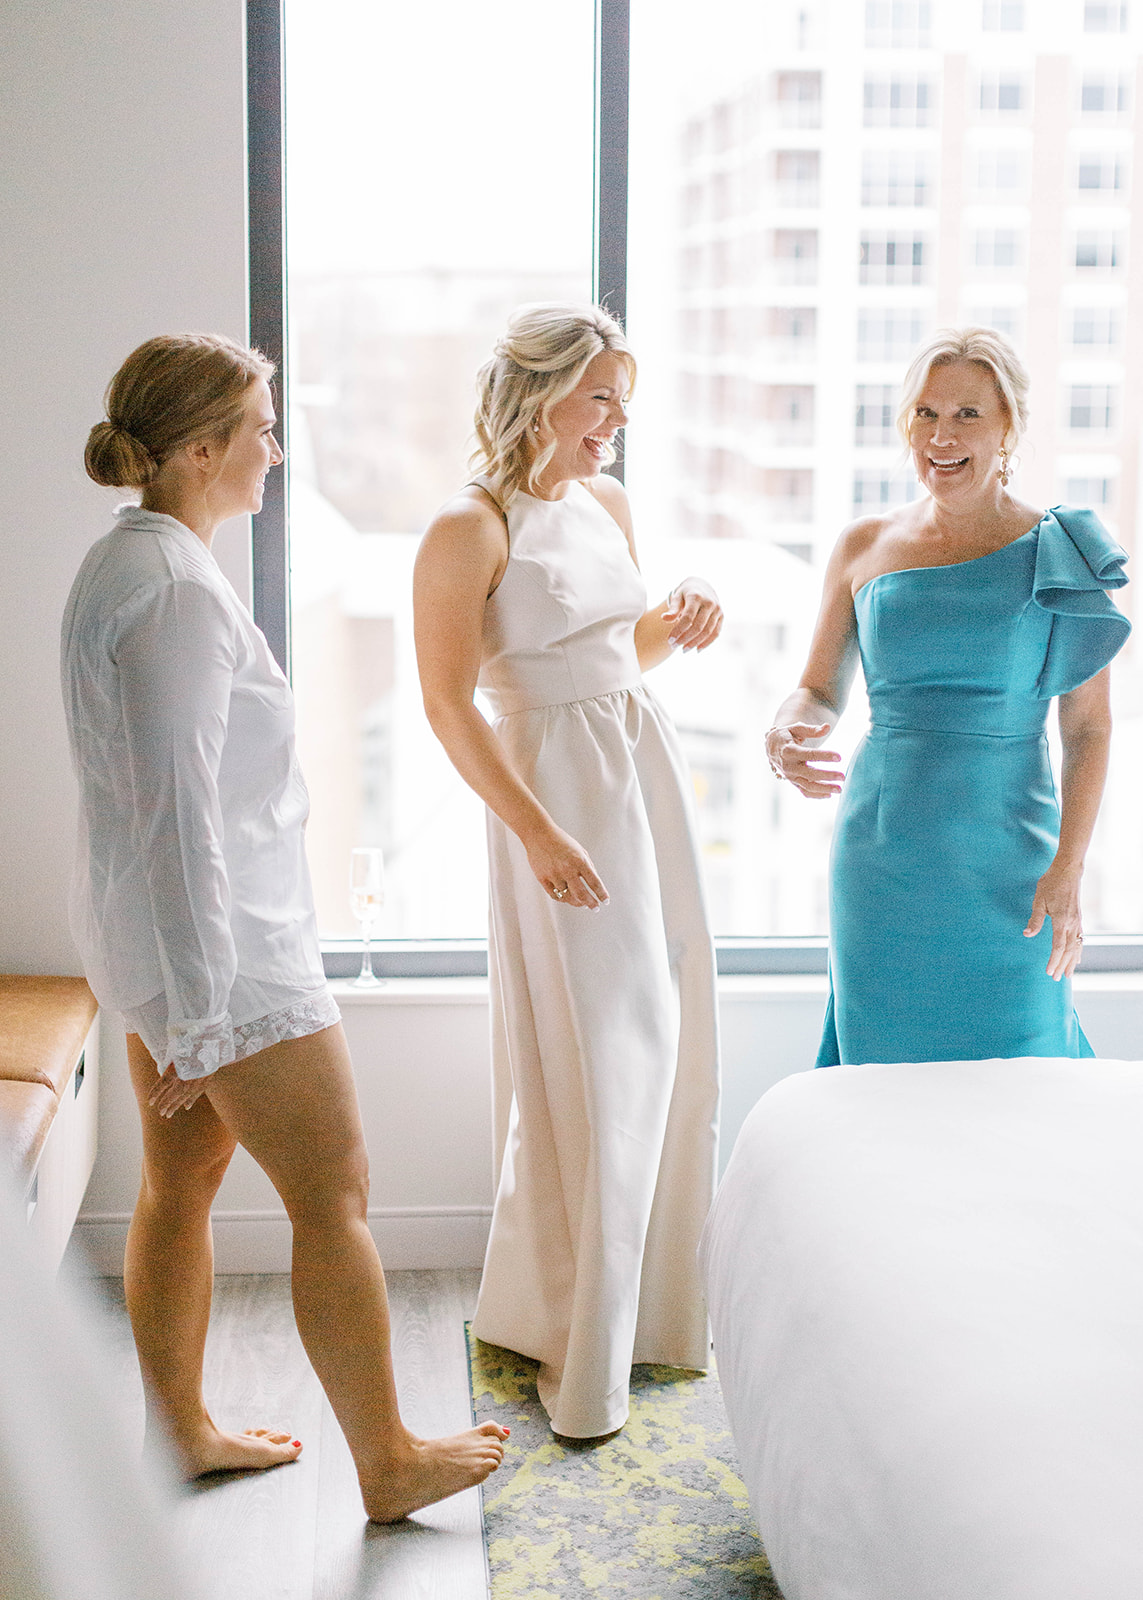 mom, bride, and sister get ready on wedding day